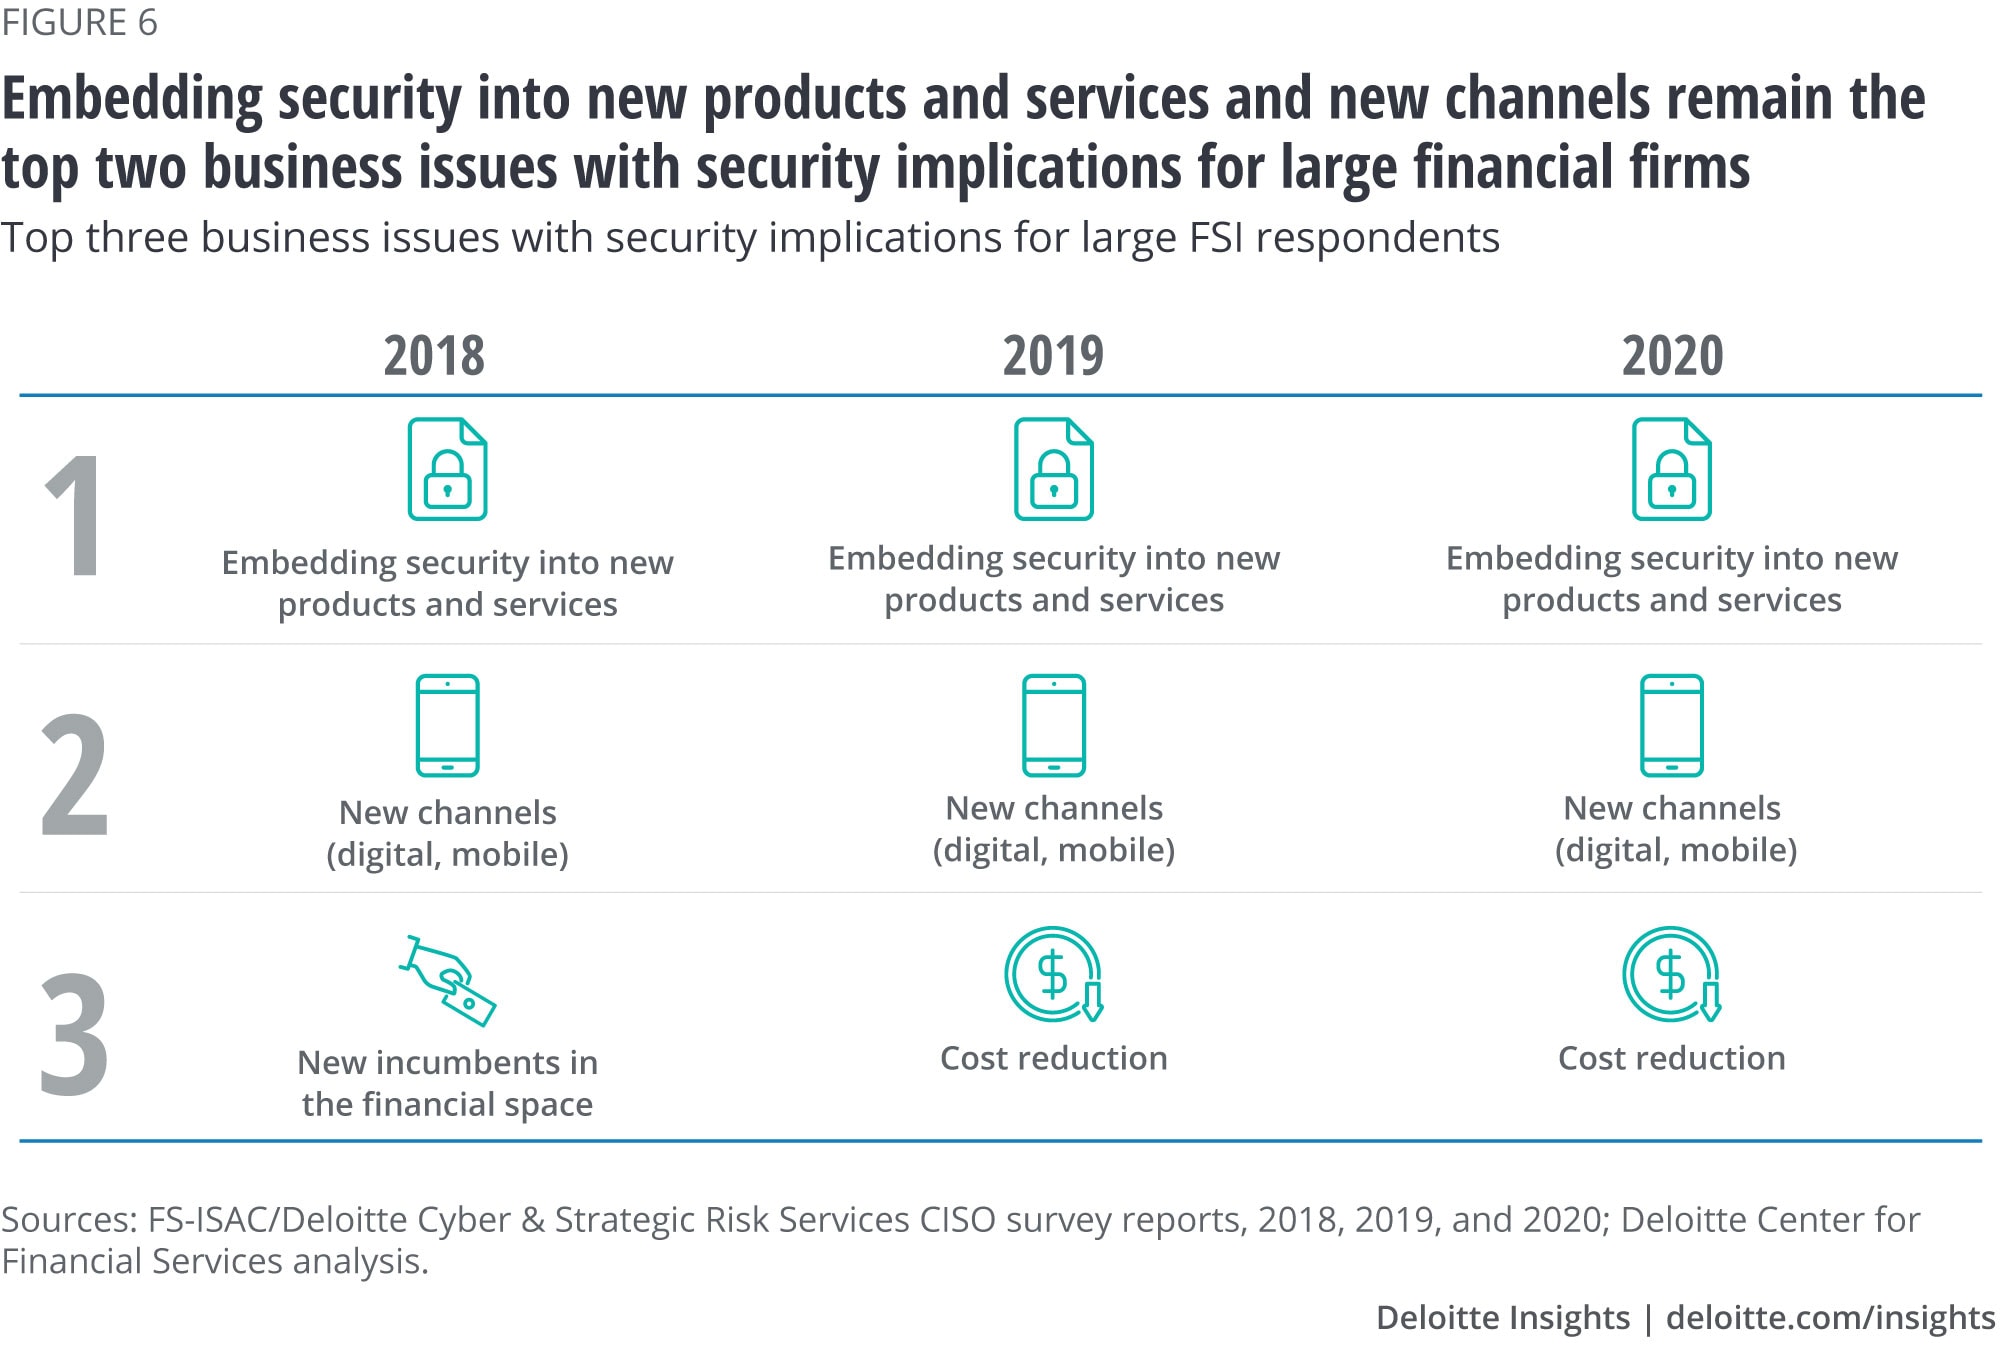 Embedding security into new products and services and new channels remain top two business issues with security implications for large FSIs